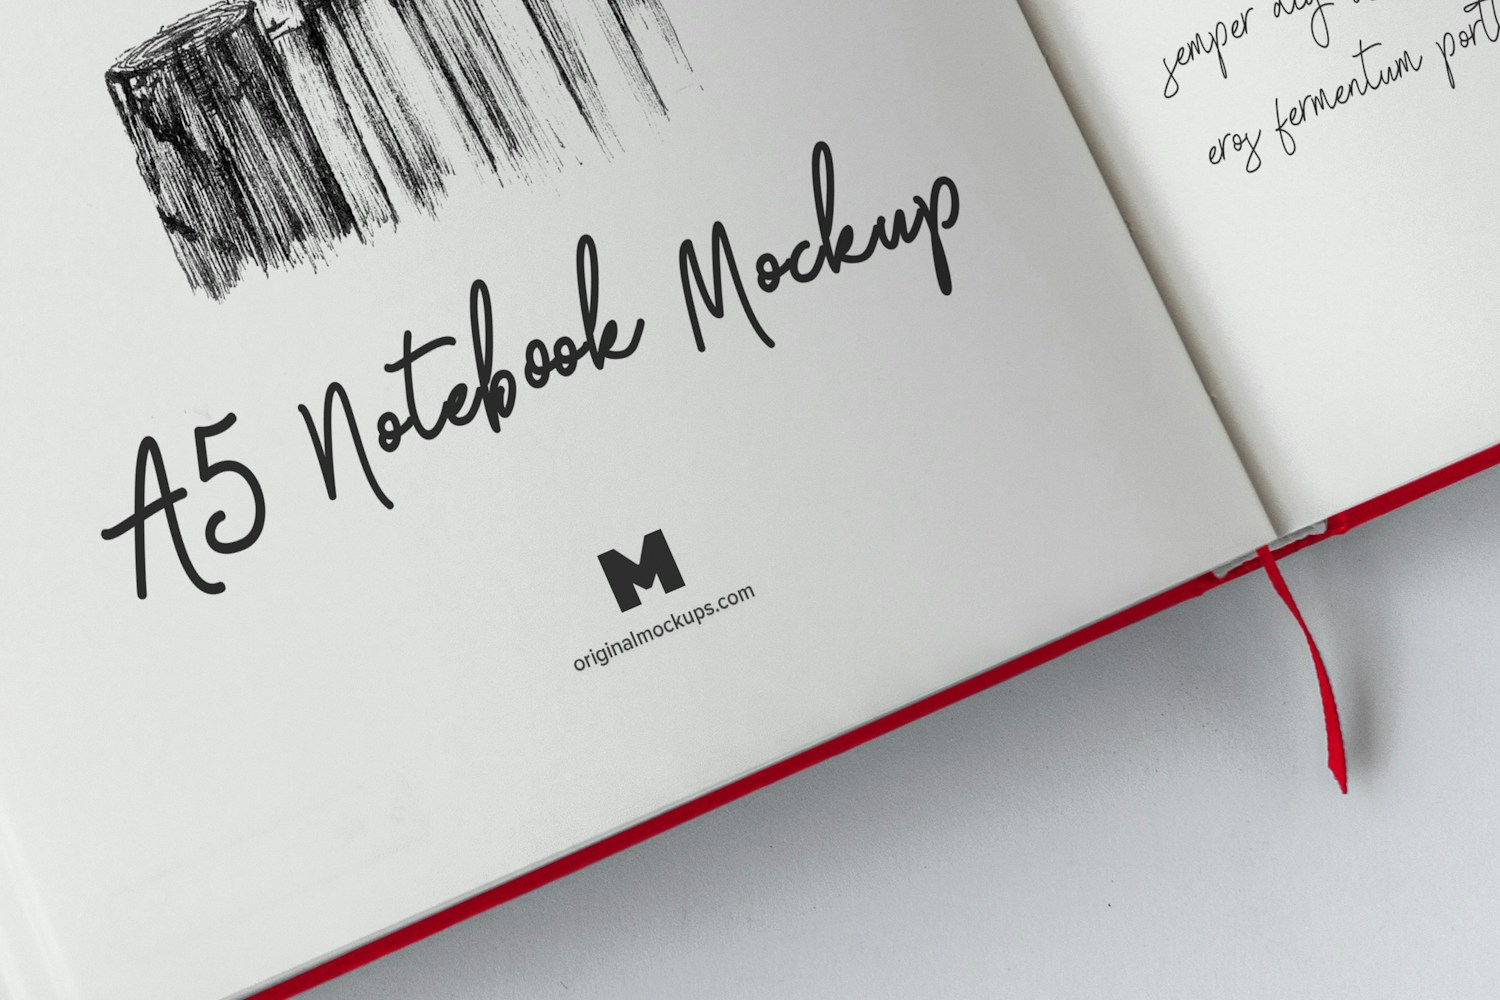 A5 Hardcover Notebook Mockup 02